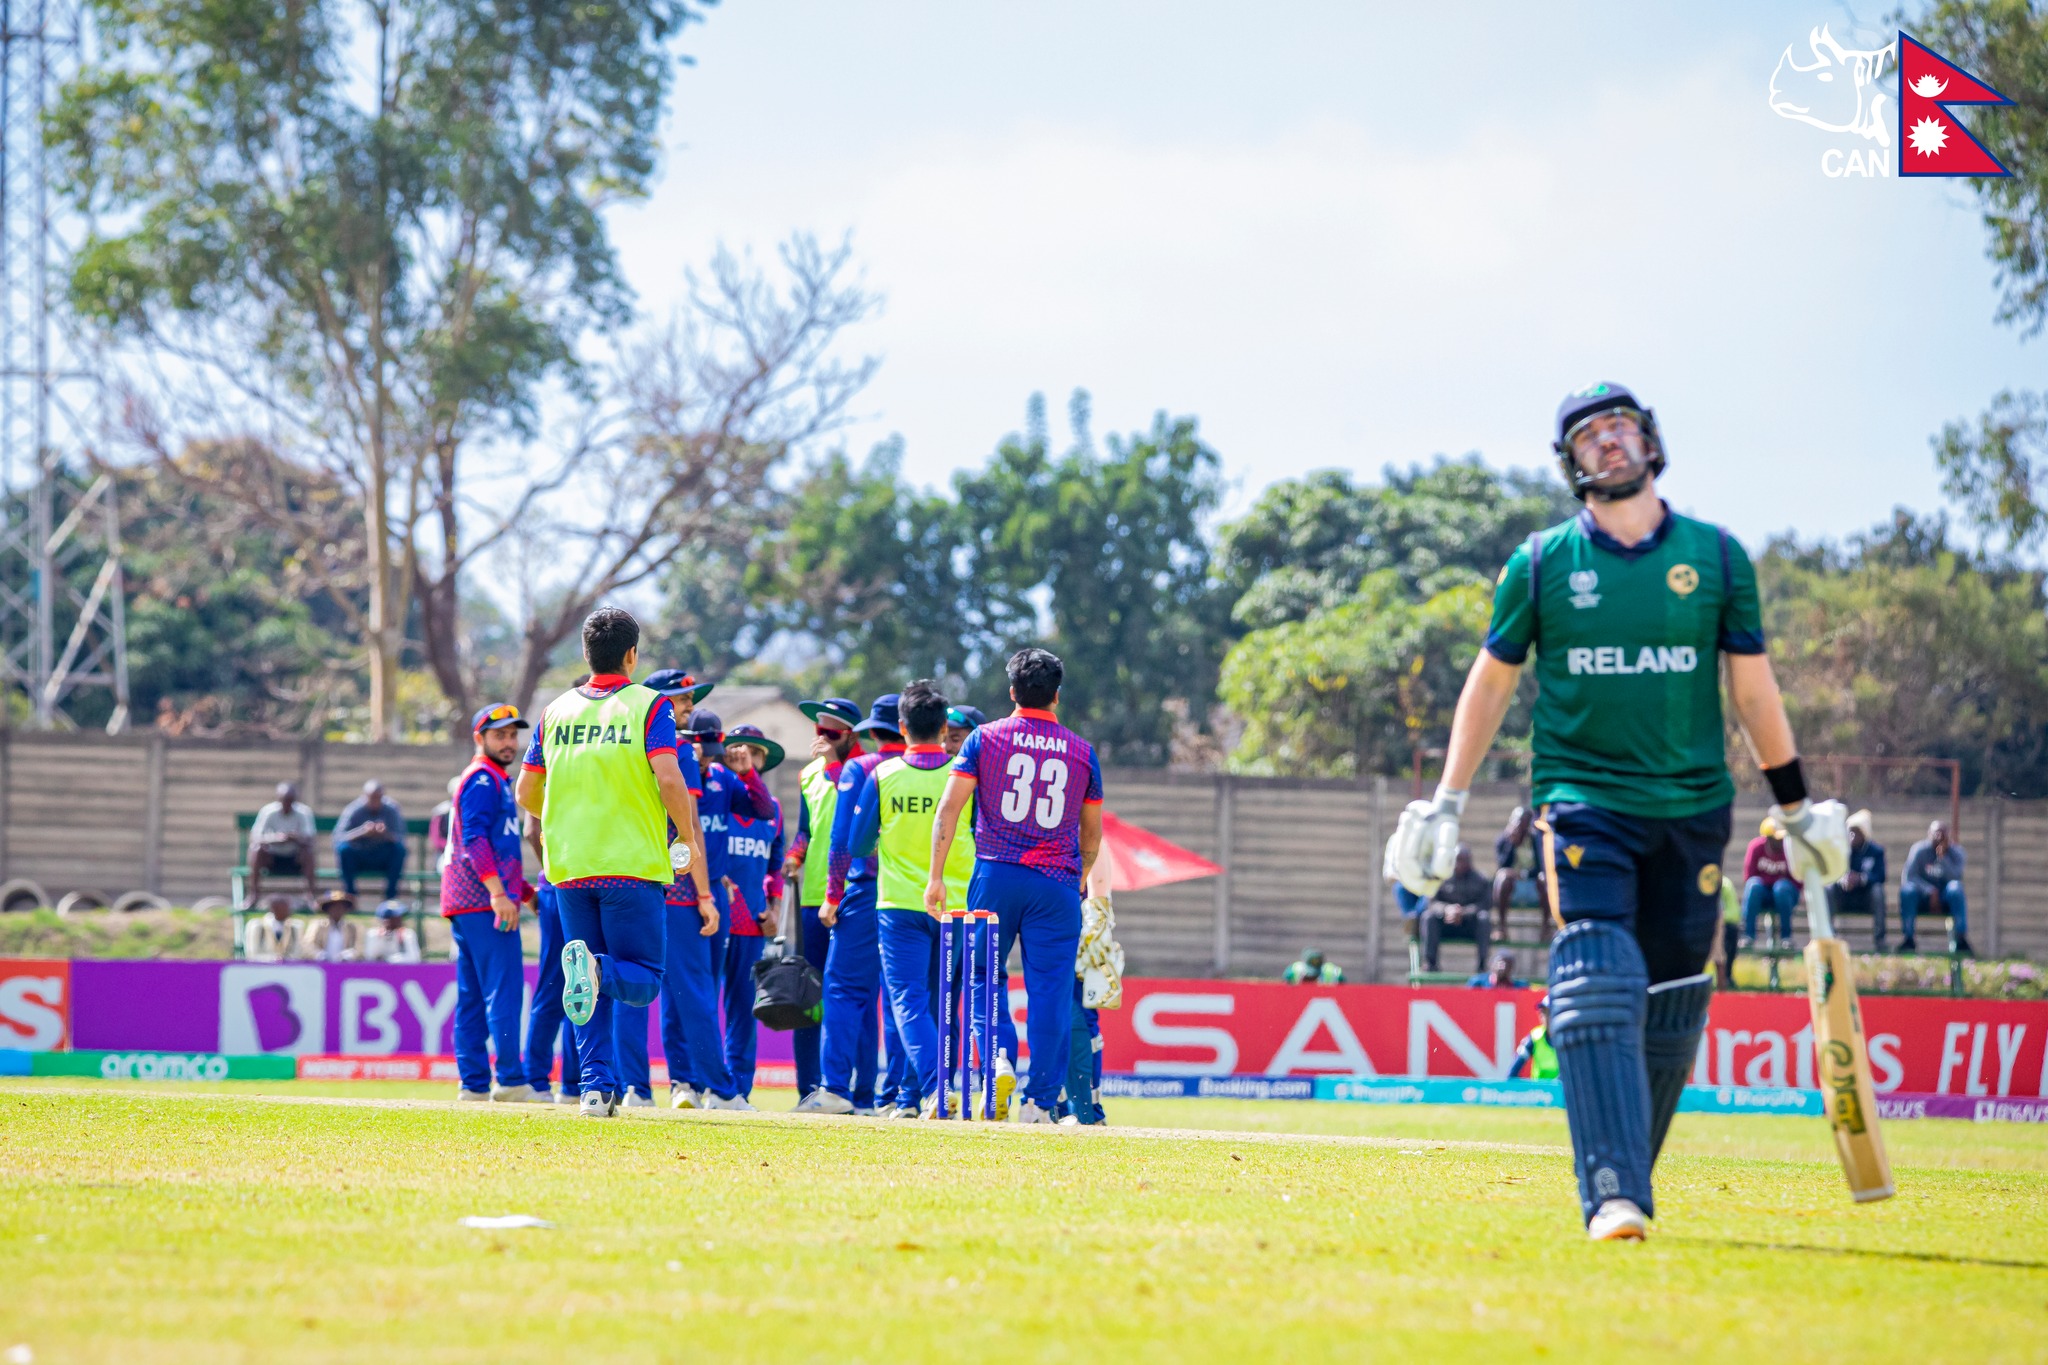 Nepal lose a nail-biter against Ireland to finish 8th in the ICC World Cup Qualifier